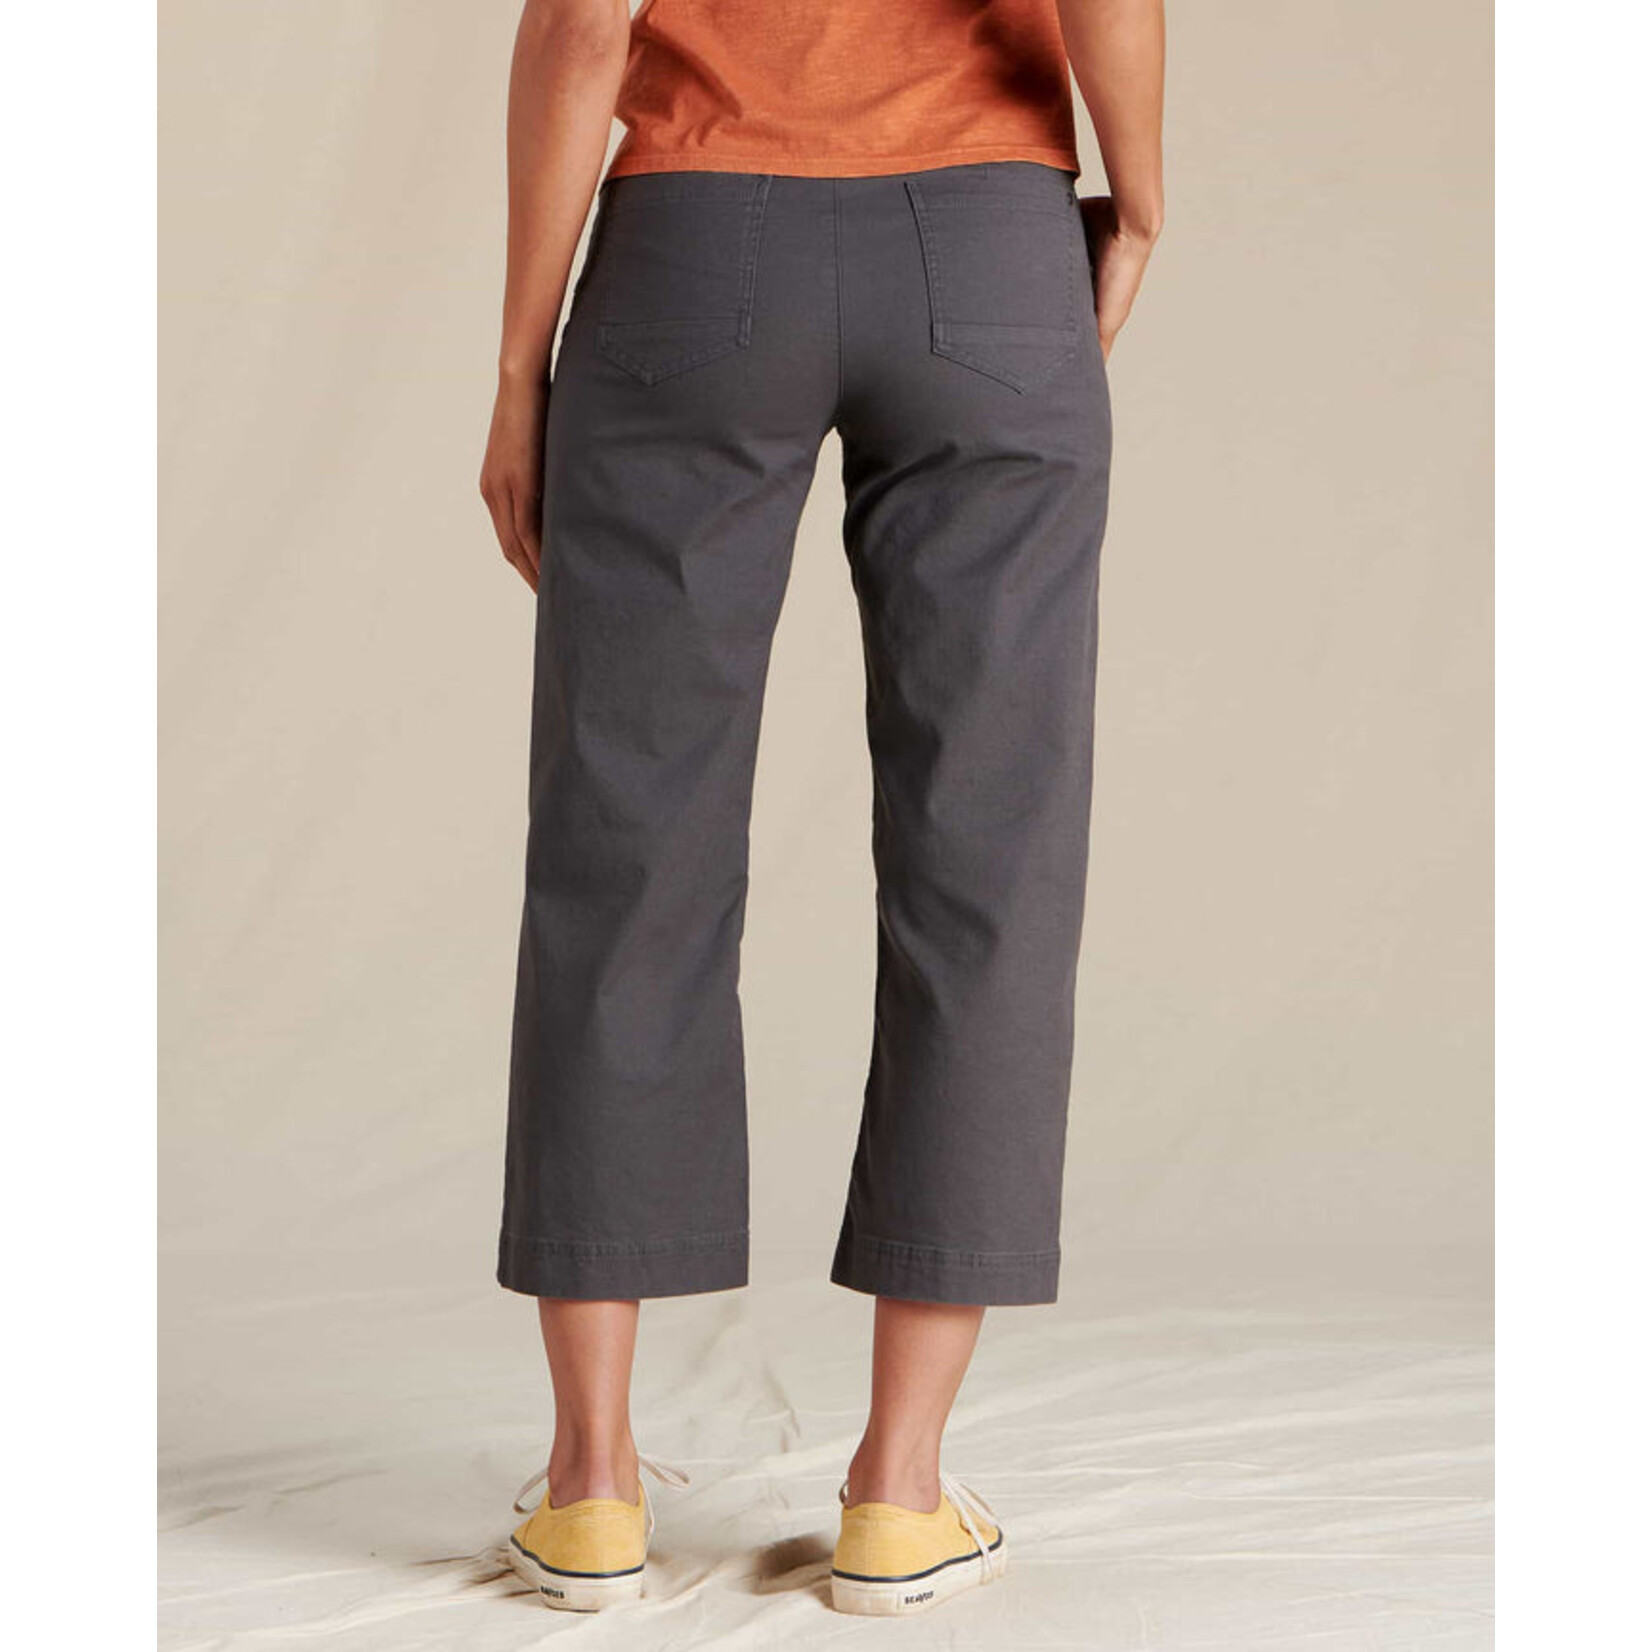 Toad & Co Women's Earthworks Wide Leg Pant